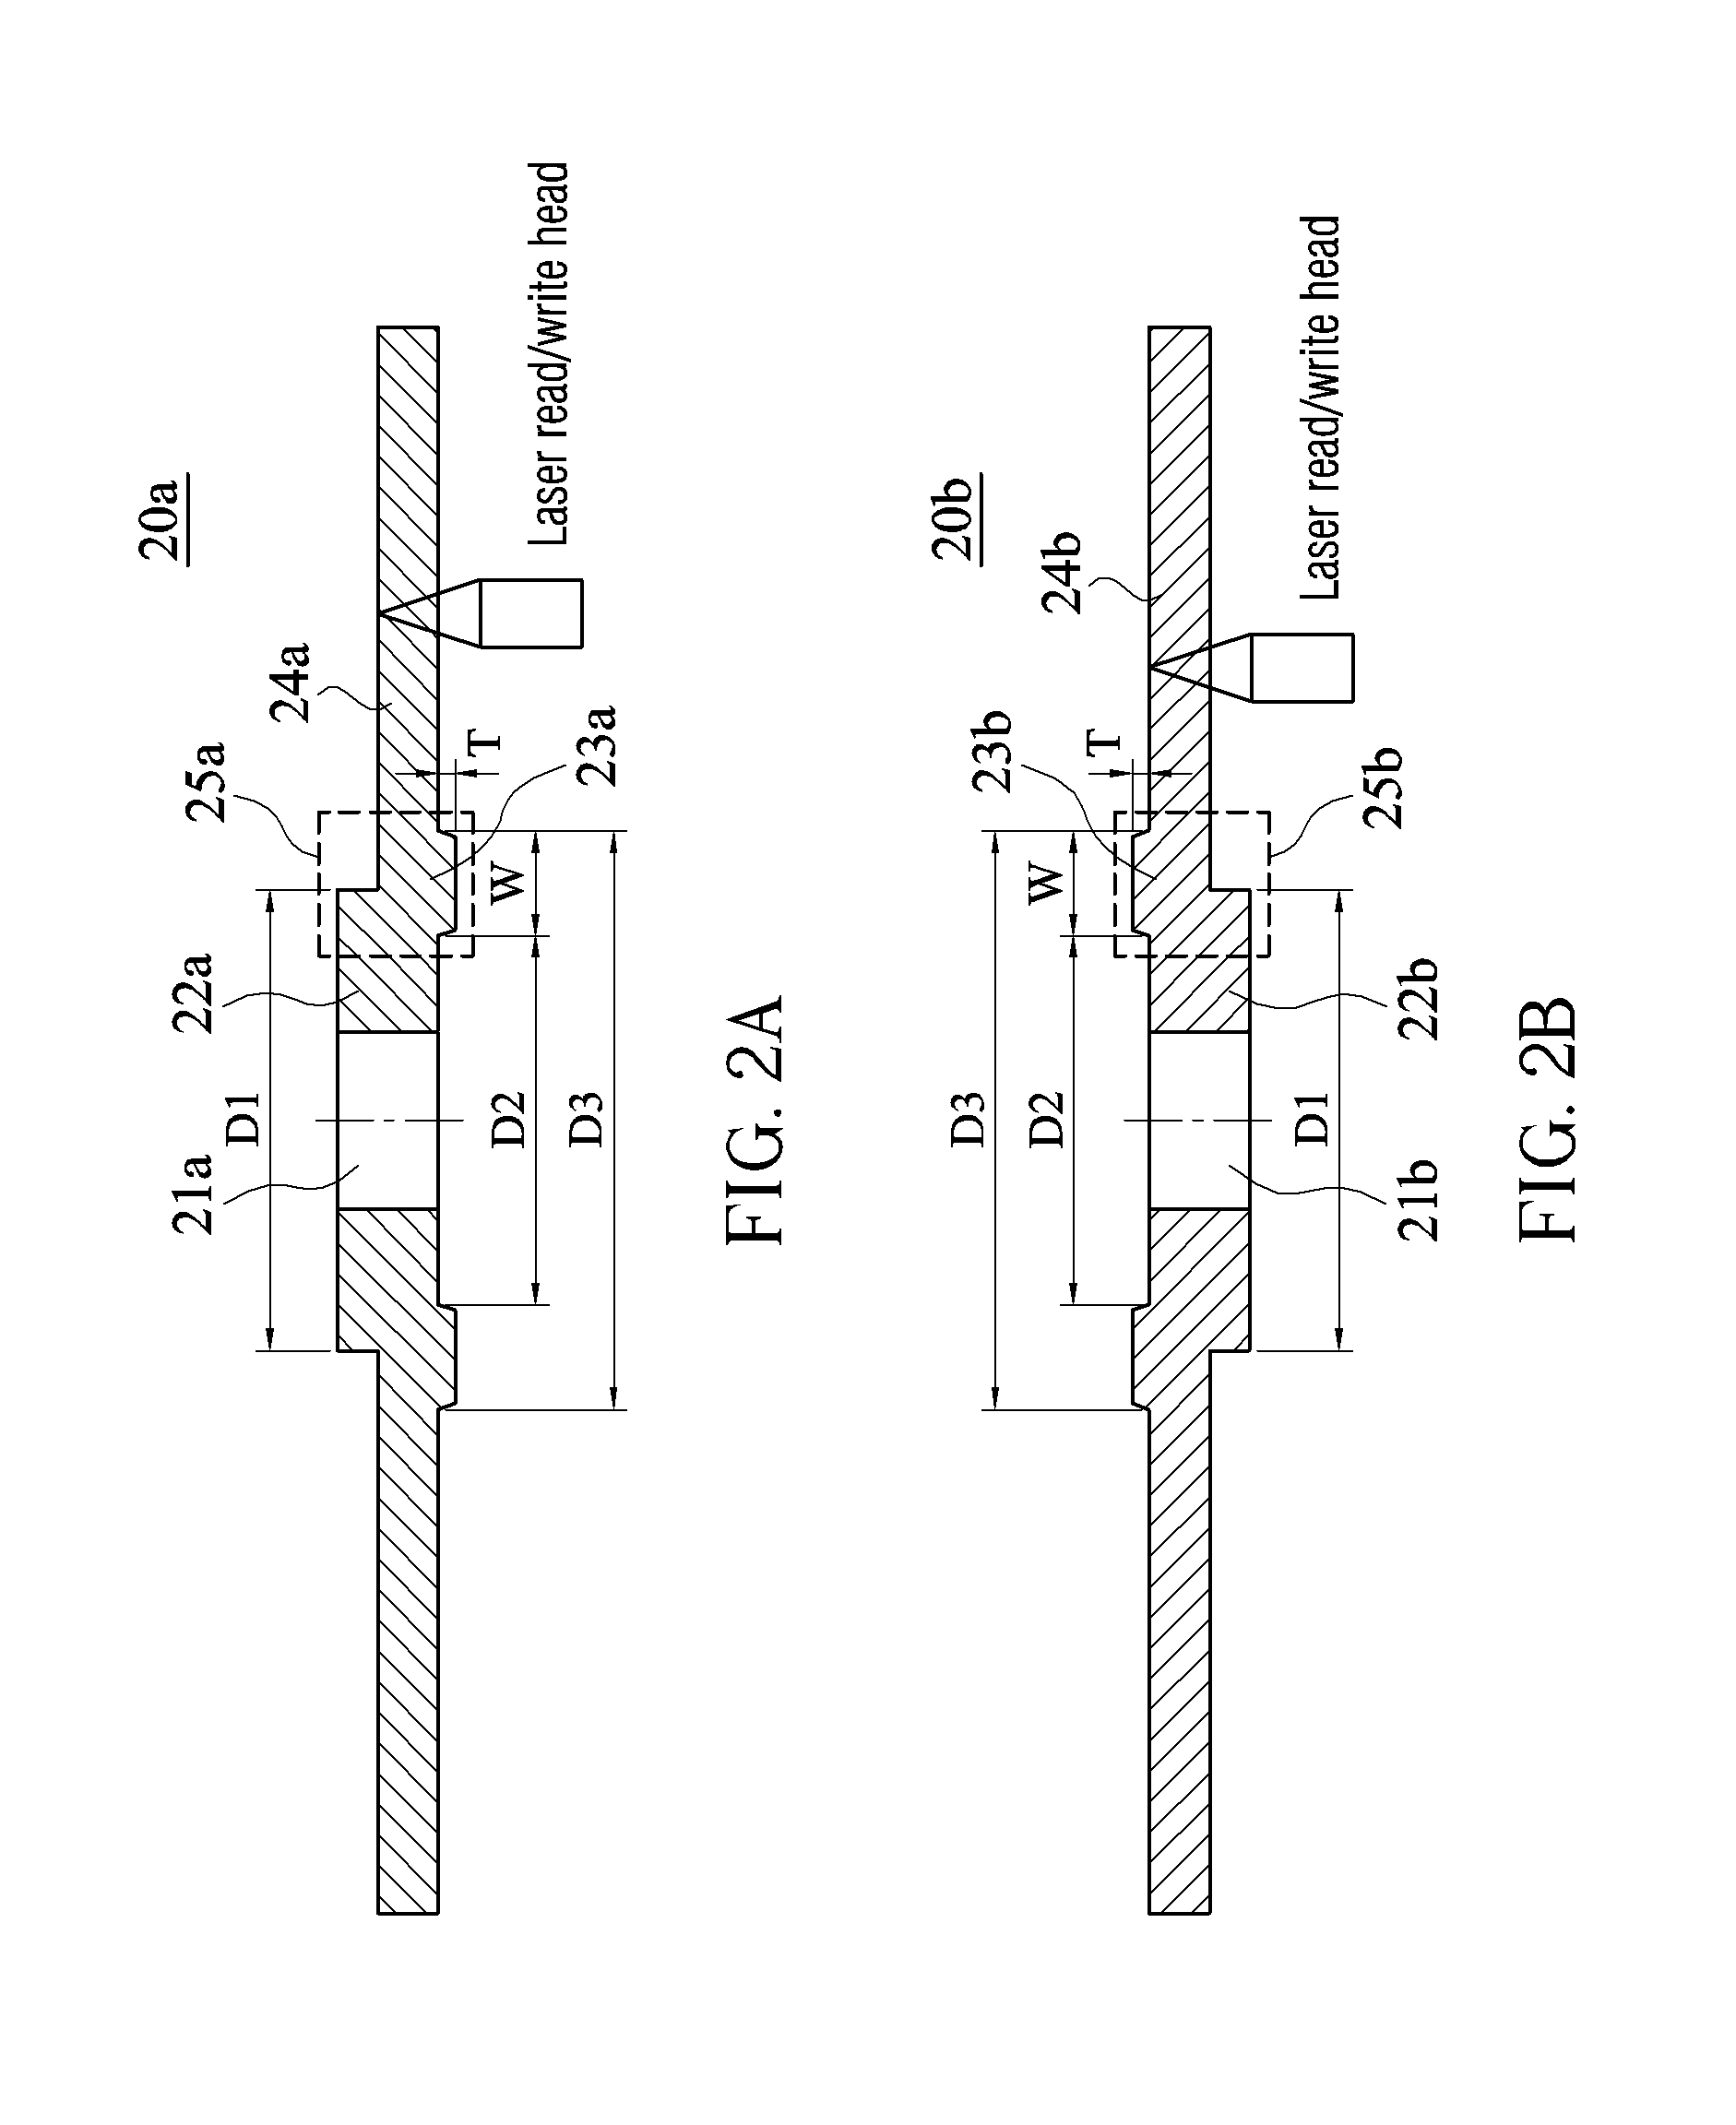 Optical disc with thicker supporting section and thinner recording section